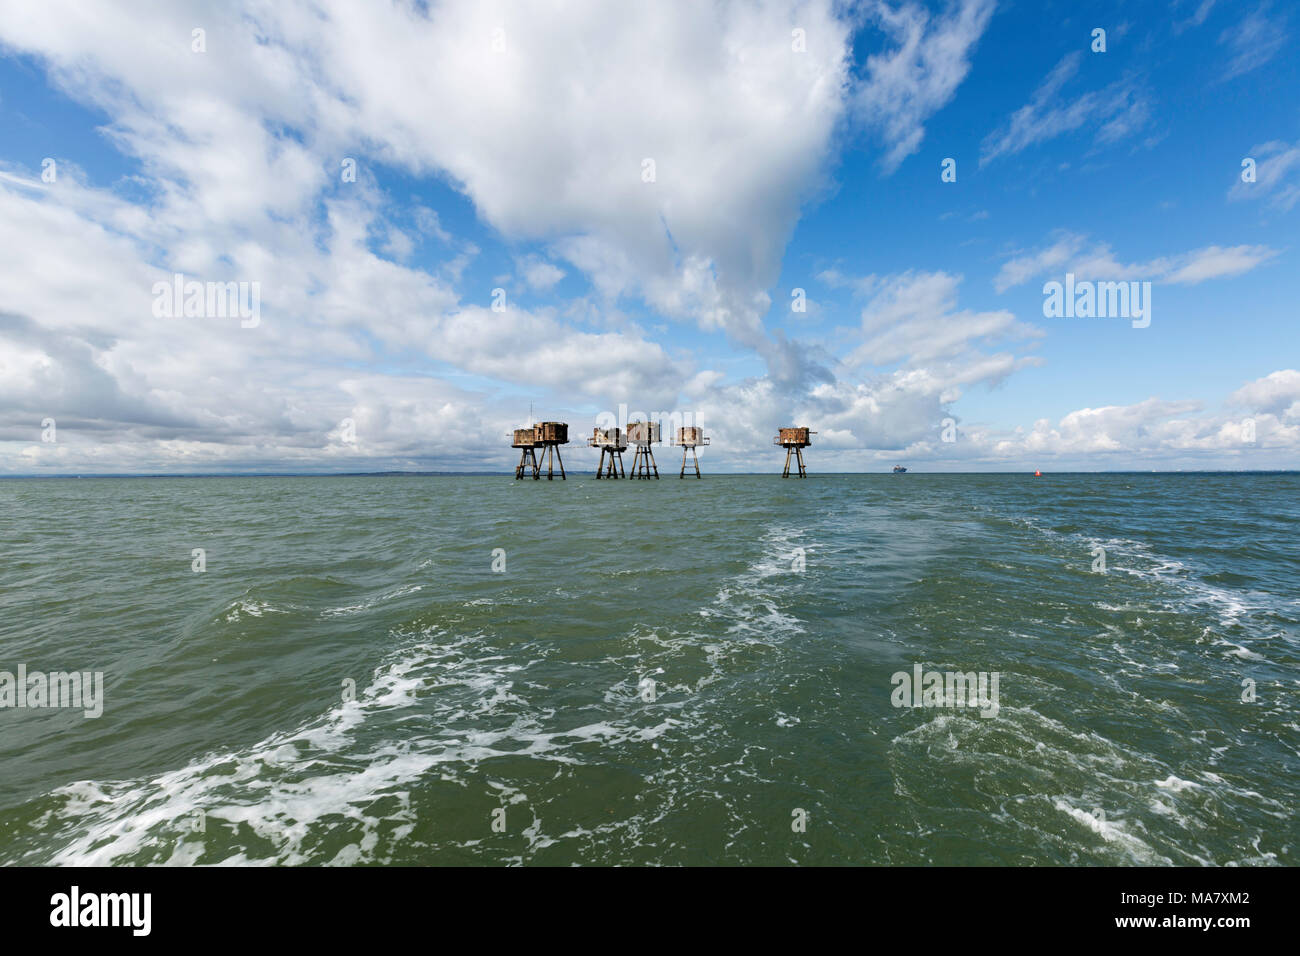 The World War II Maunsell Forts in the Thames Estuary off the North Kent coast. Stock Photo